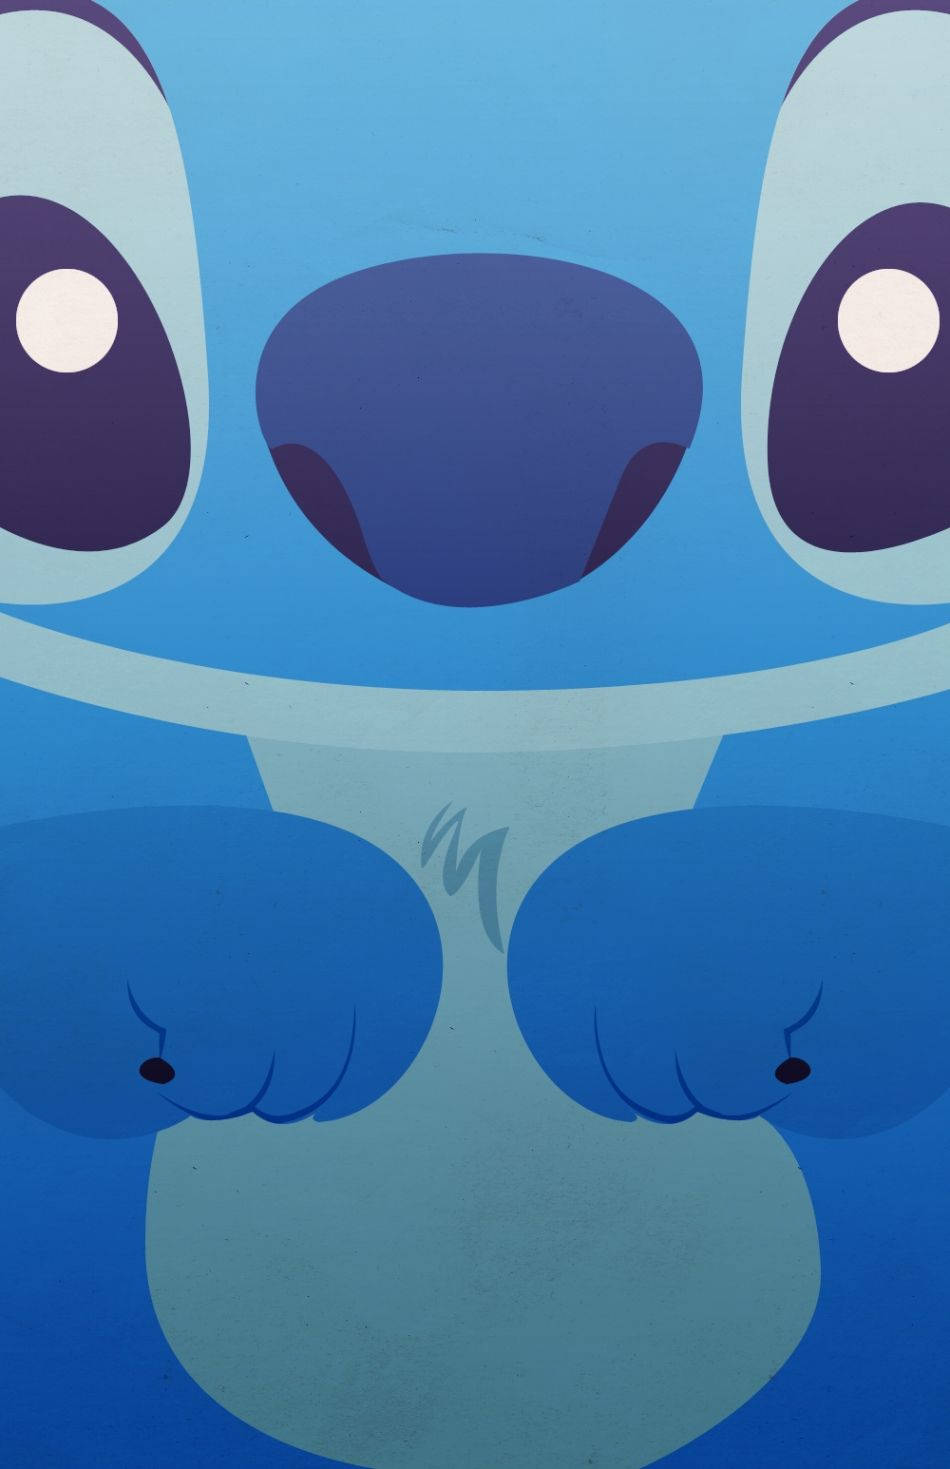 Pout away your troubles with this cute Kawaii Stitch. Wallpaper